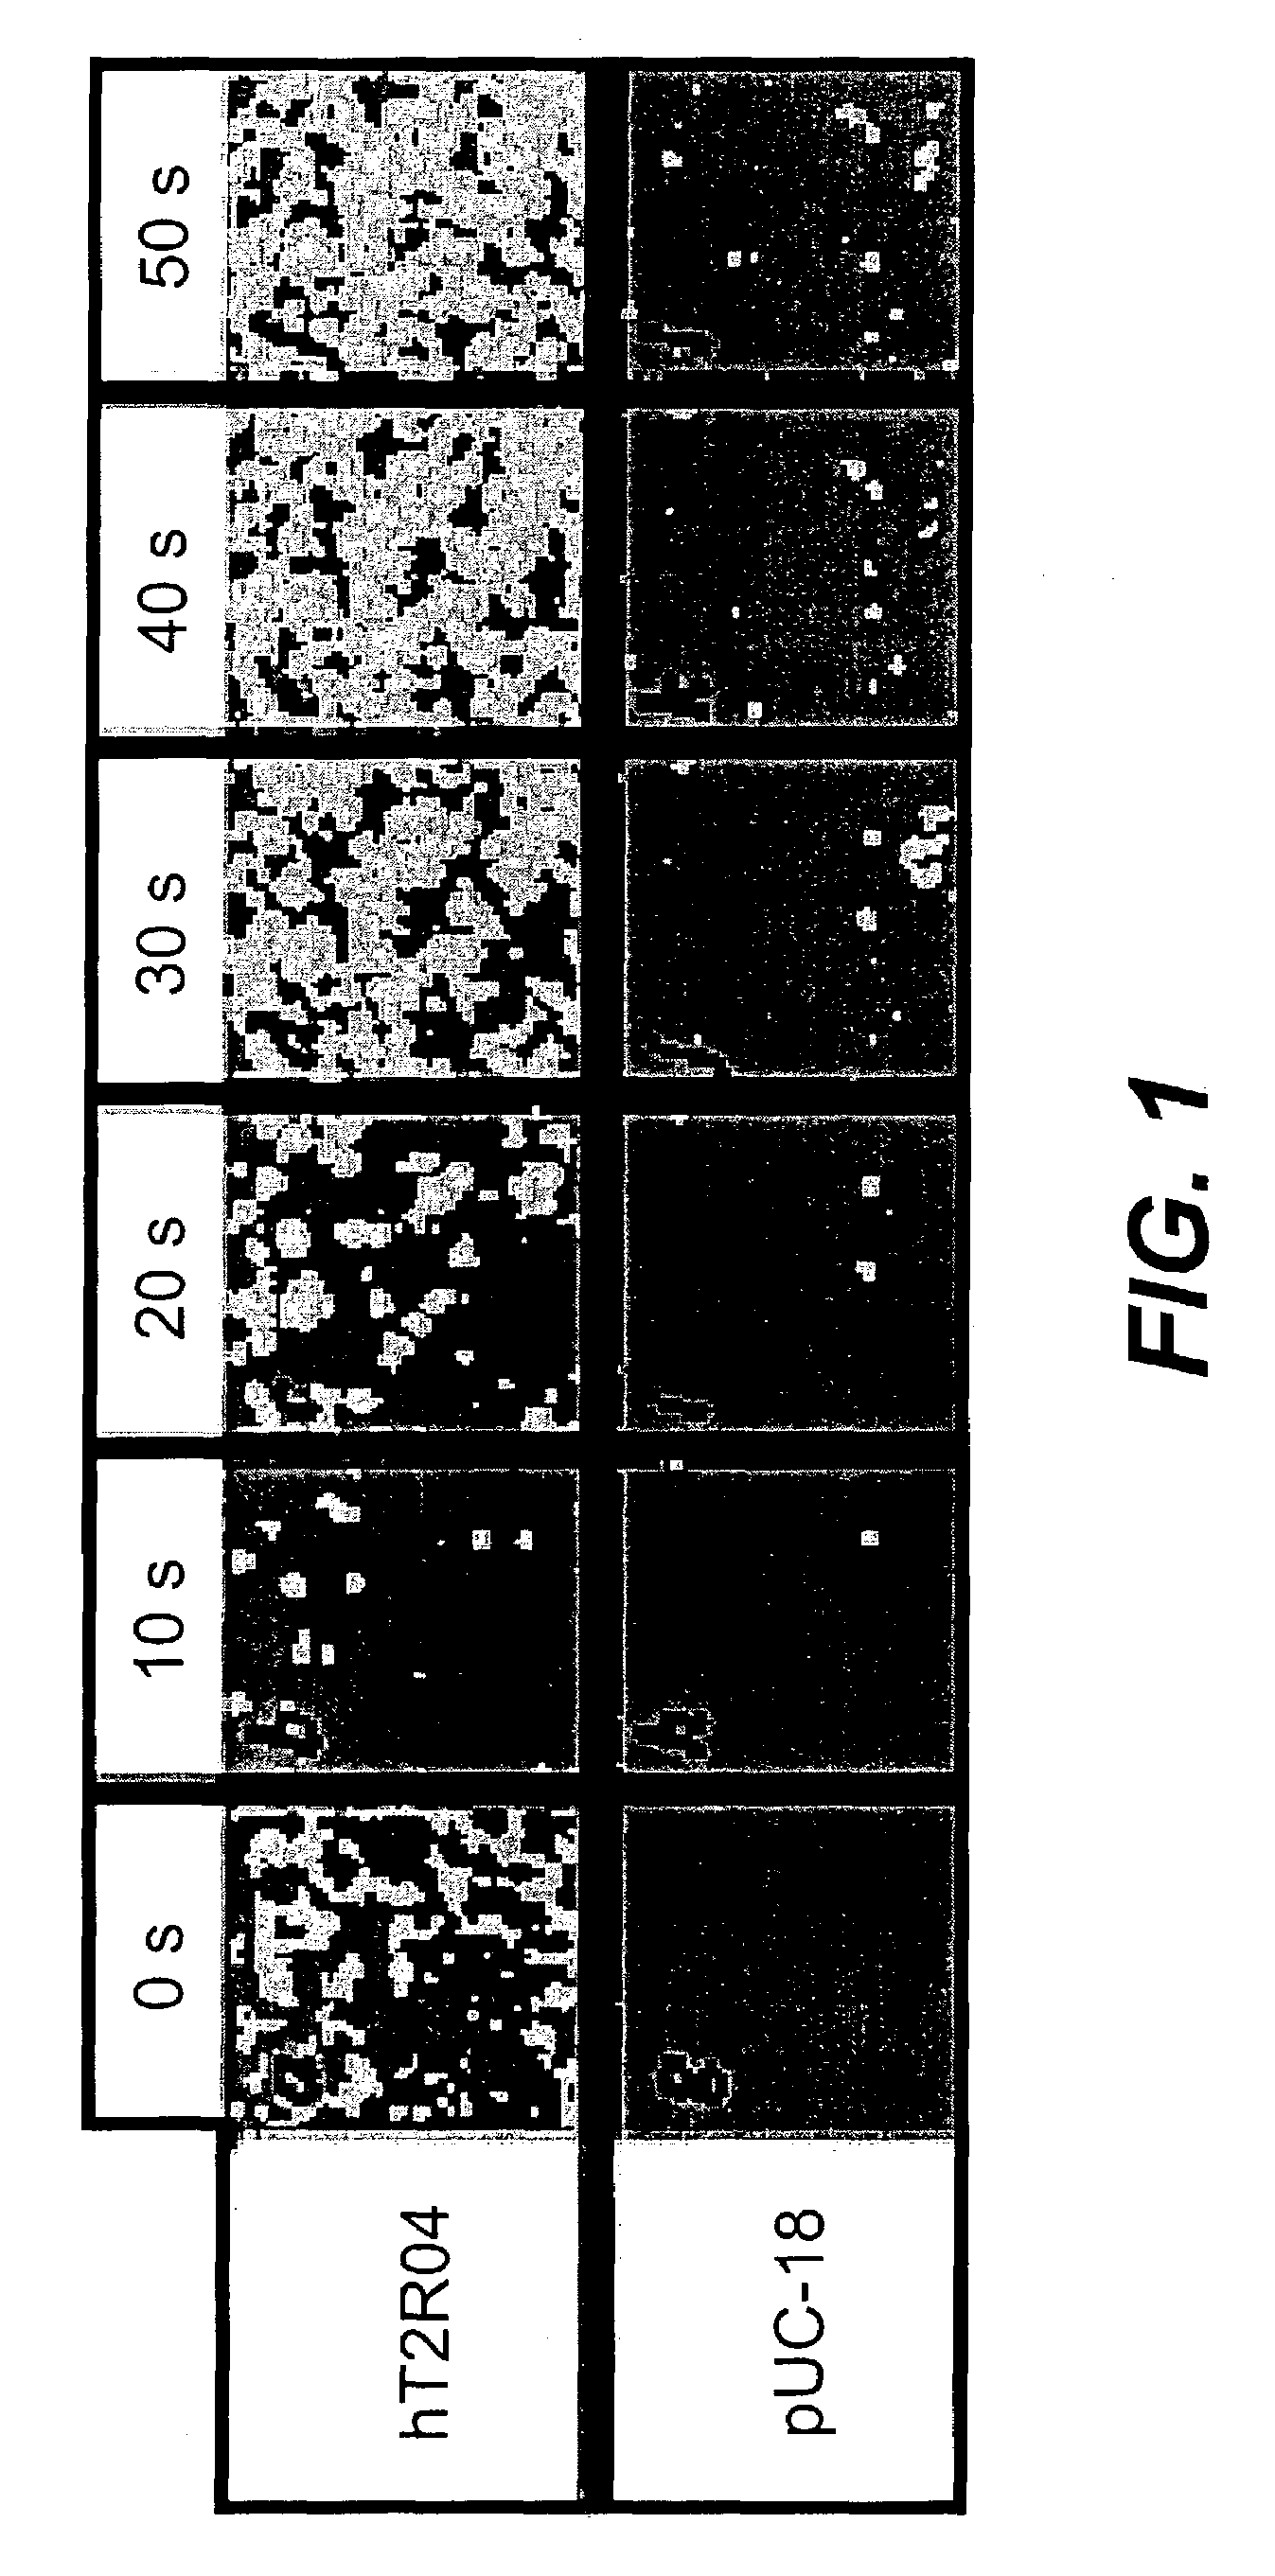 Use of specific T2R taste receptors to identify compounds that block bitter taste